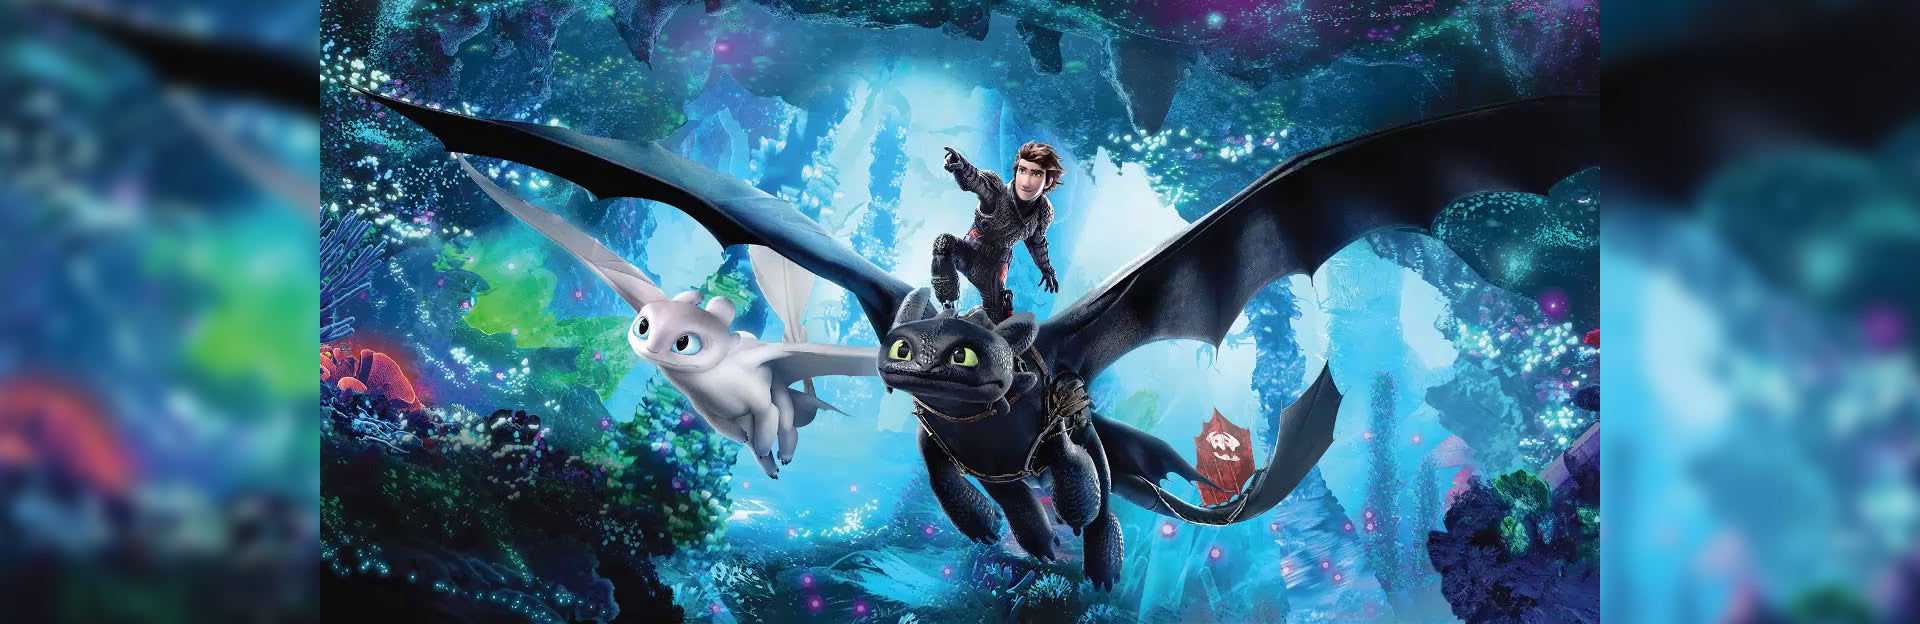 Is How To Train Your Dragon Disney? Answered (2023)